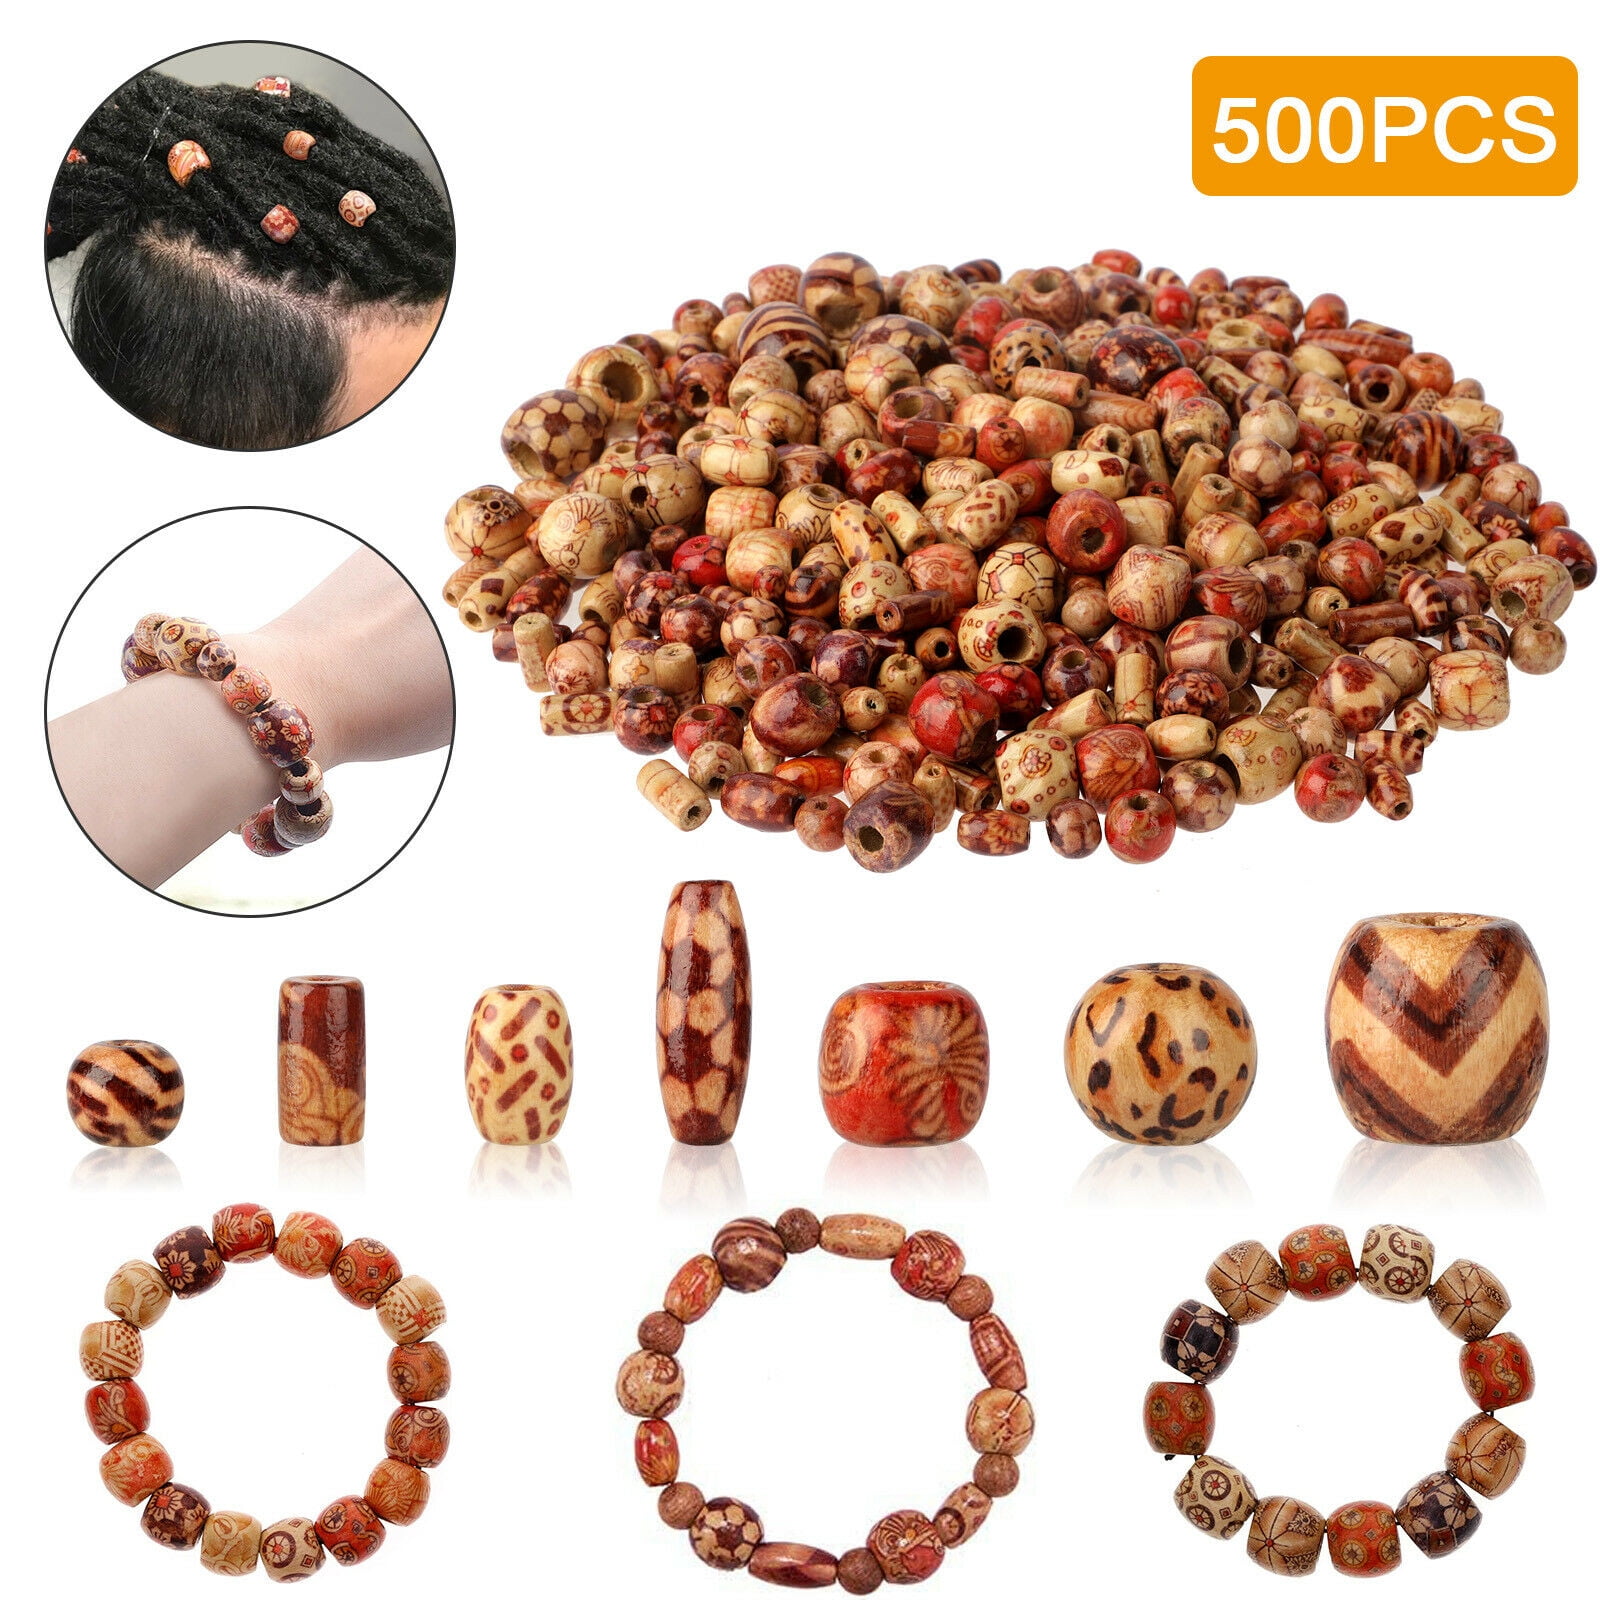 Mandala Crafts Natural Wooden Beads for Crafts Loose Large Hole Wood Beads  for Macrame Beads Jewelry Making - Barrel Wood Beads for Hair Beads Braid